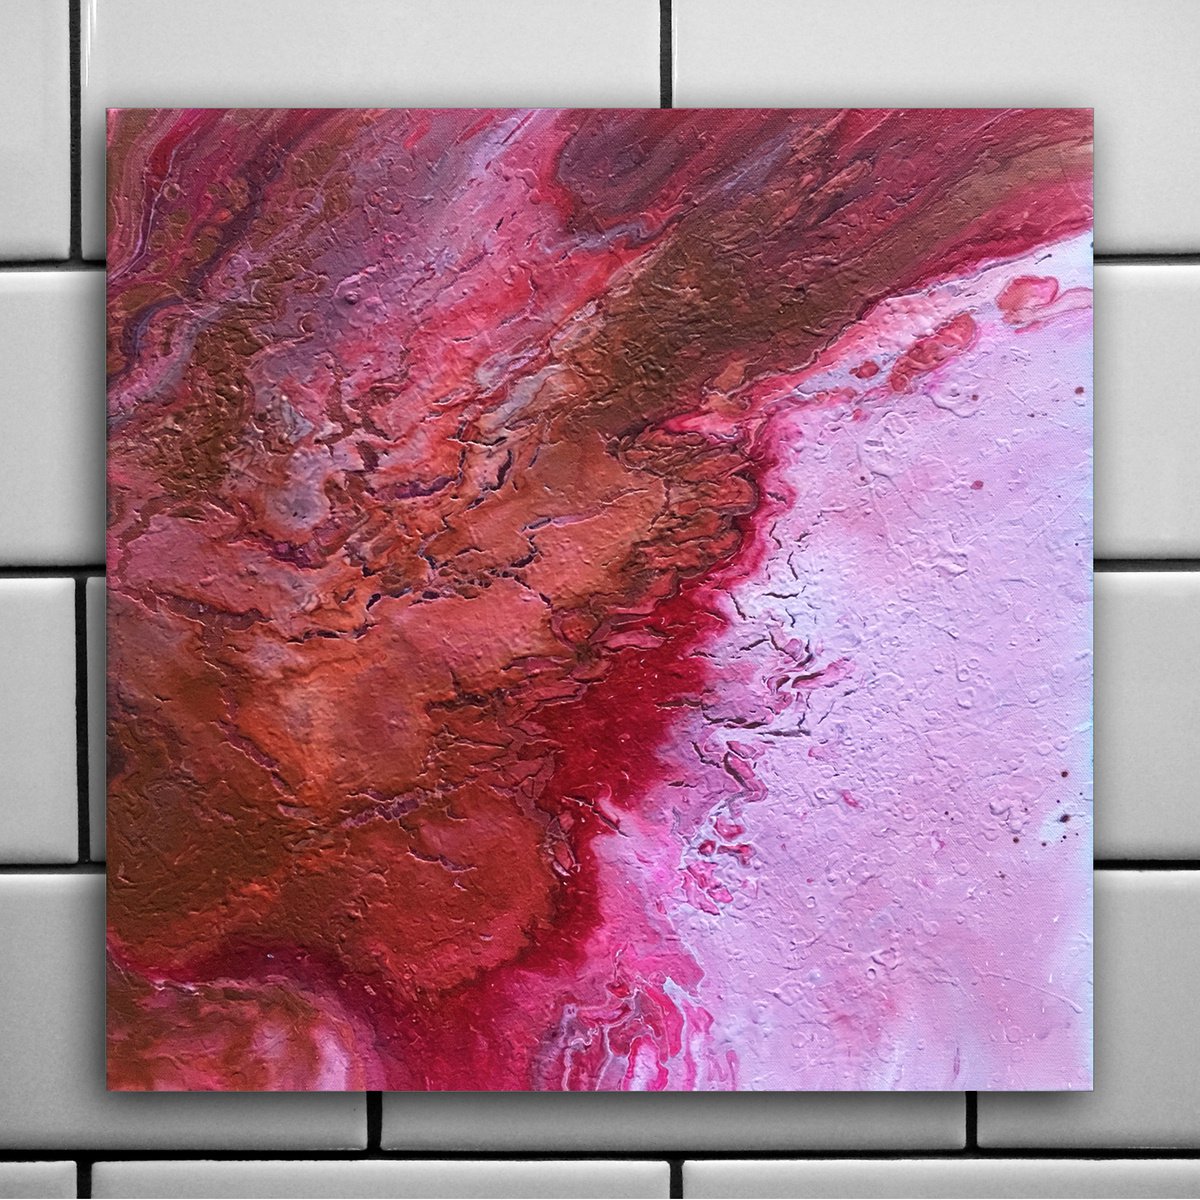 Glaciers Of Mars - Original Abstract PMS Fluid Acrylic Painting - 20 x 20 inches by Preston M. Smith (PMS)